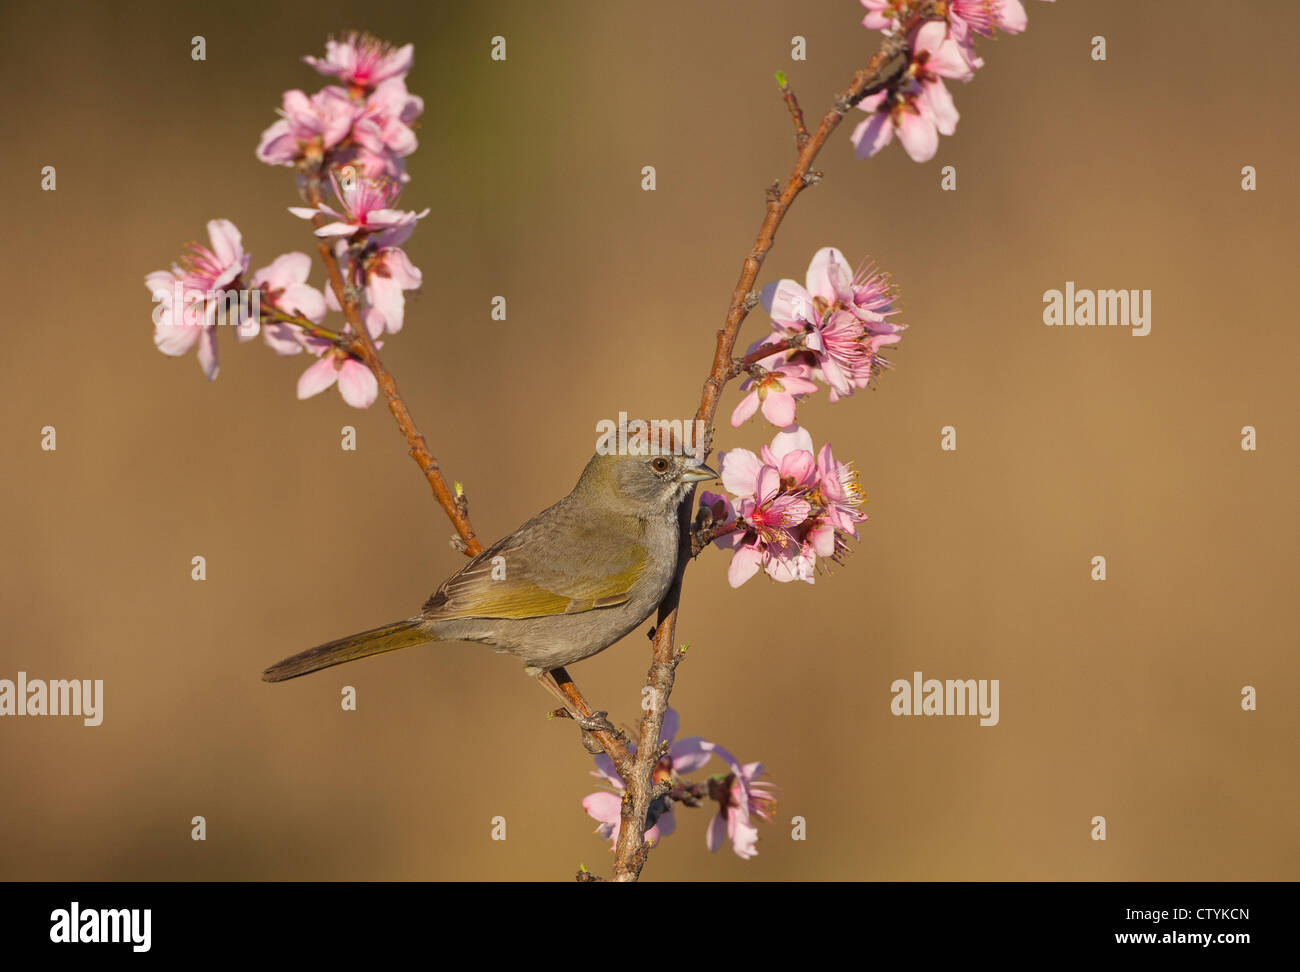 Green-tailed Towhee (Pipilo chlorurus) adult perched on peach blossom, Starr County, Rio Grande Valley, South Texas, USA Stock Photo